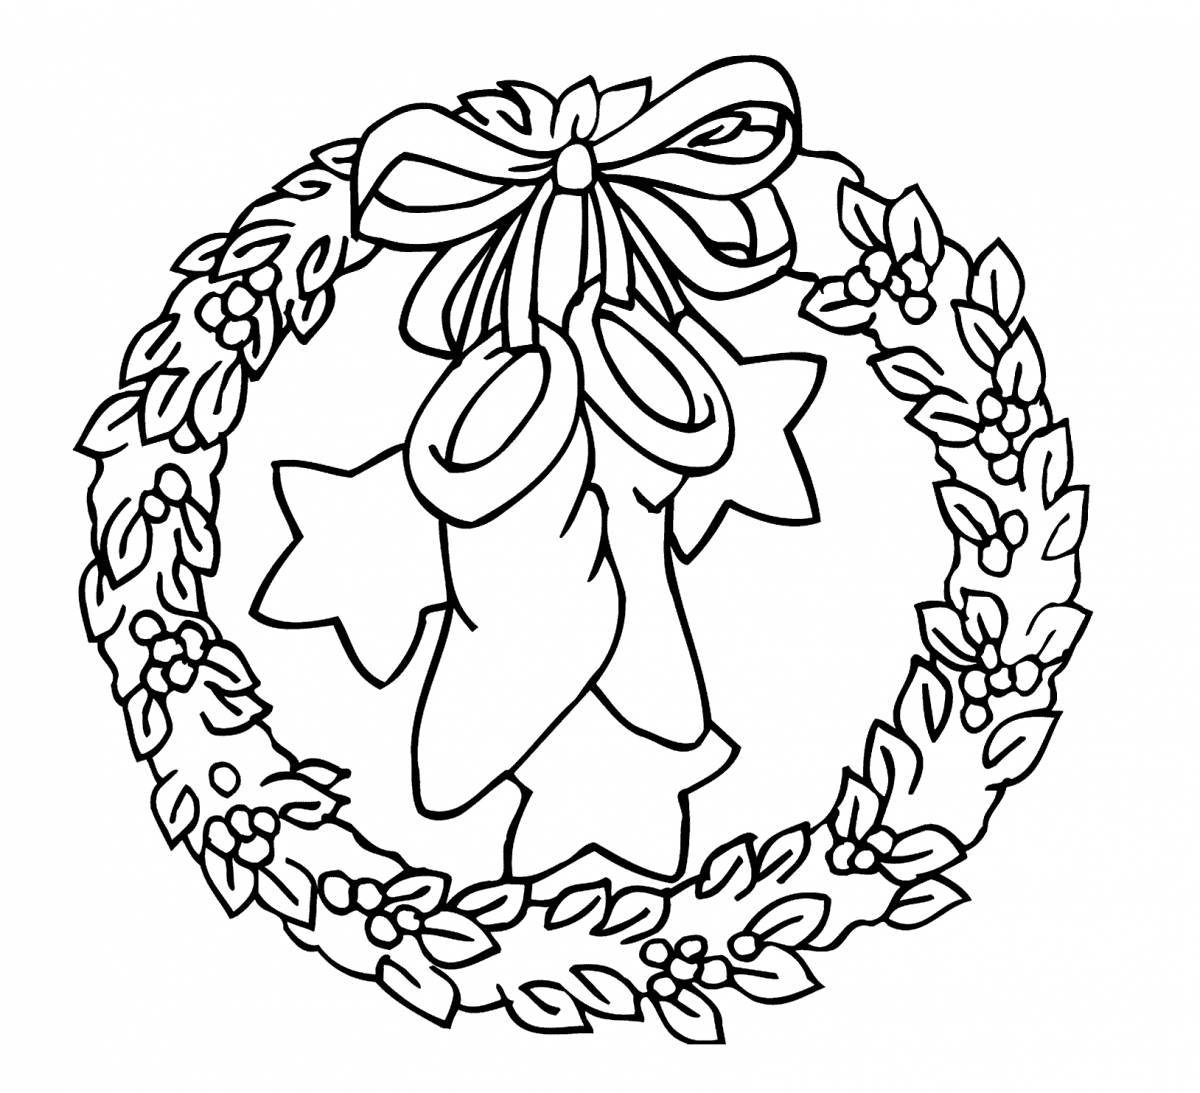 Glowing Christmas wreath coloring page